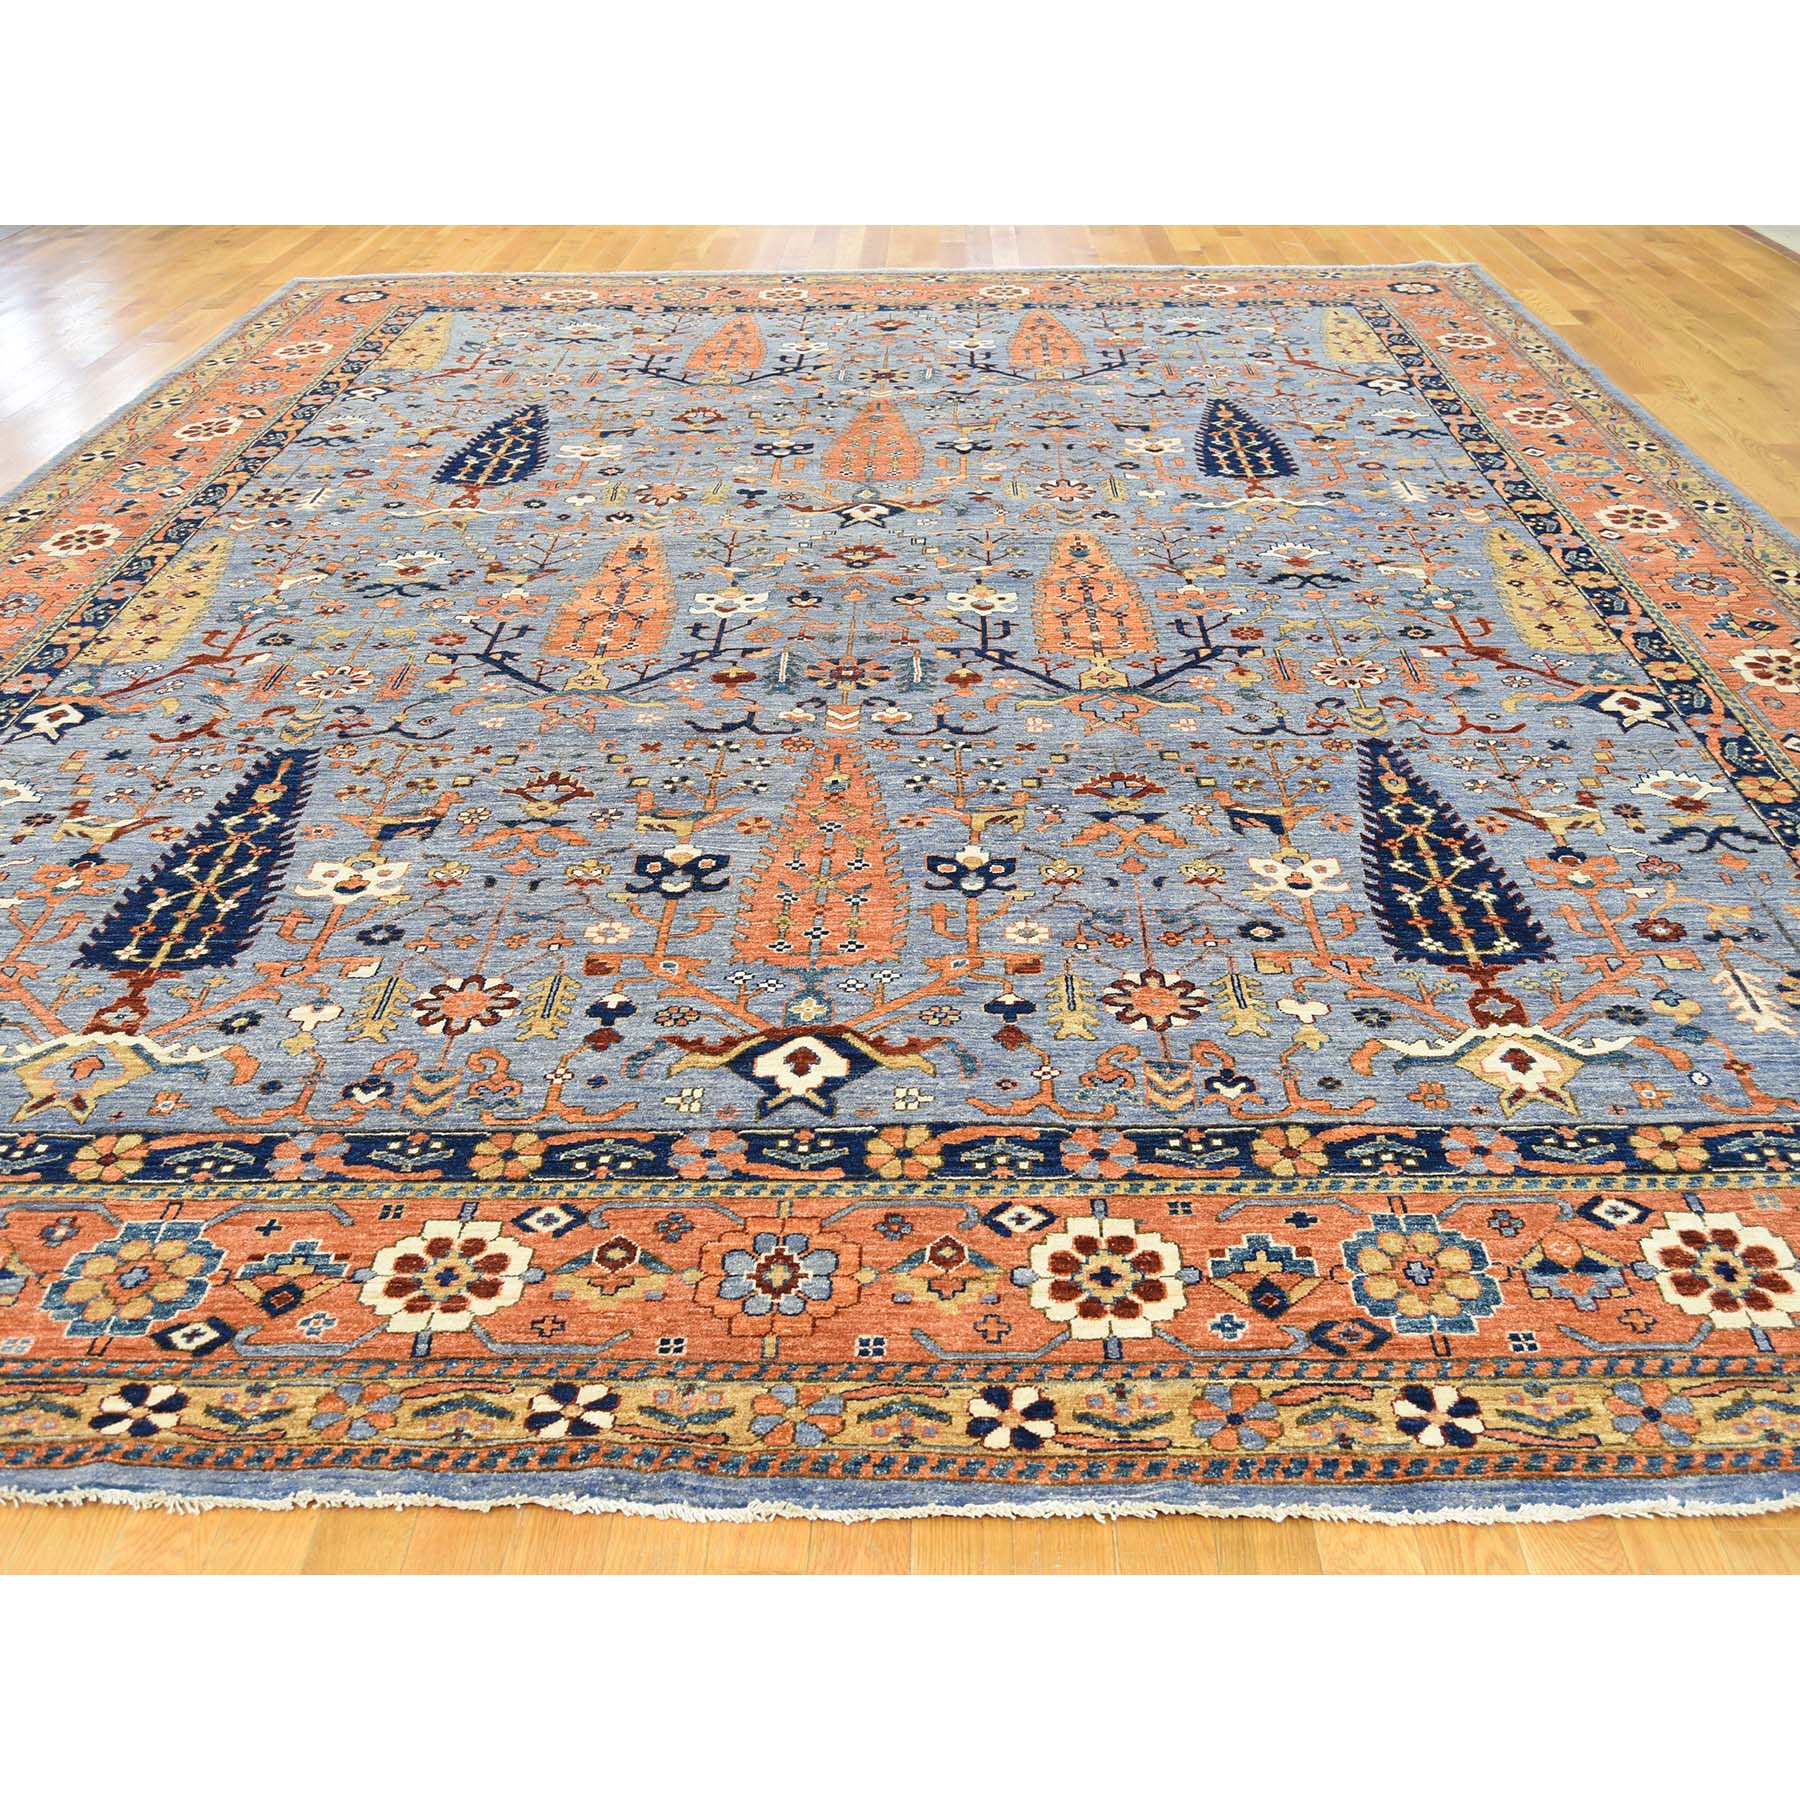 11-10--x15- Hand Knotted Willow And Cypress Tree Design Oversize Peshawar Rug 